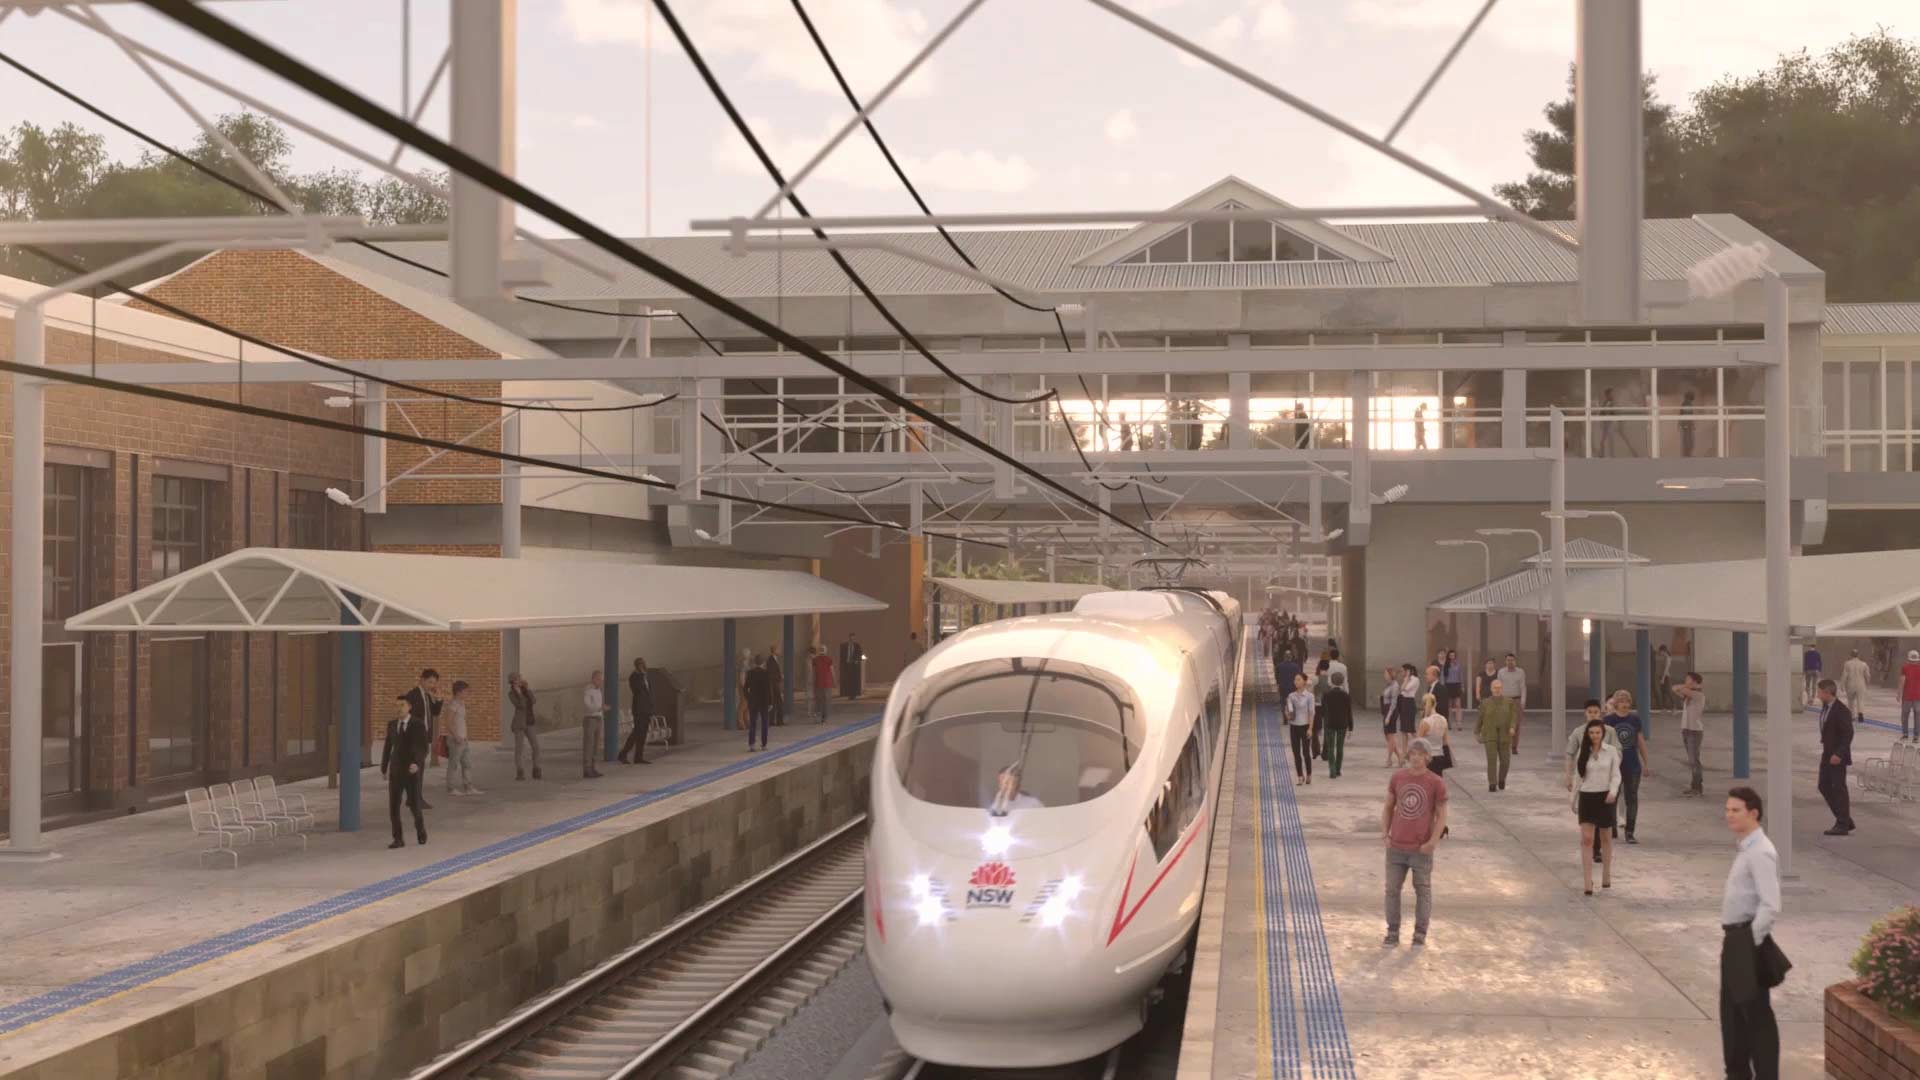 The NSW Government's Proposed High-Speed Rail Network Would Get You to Canberra in One Hour